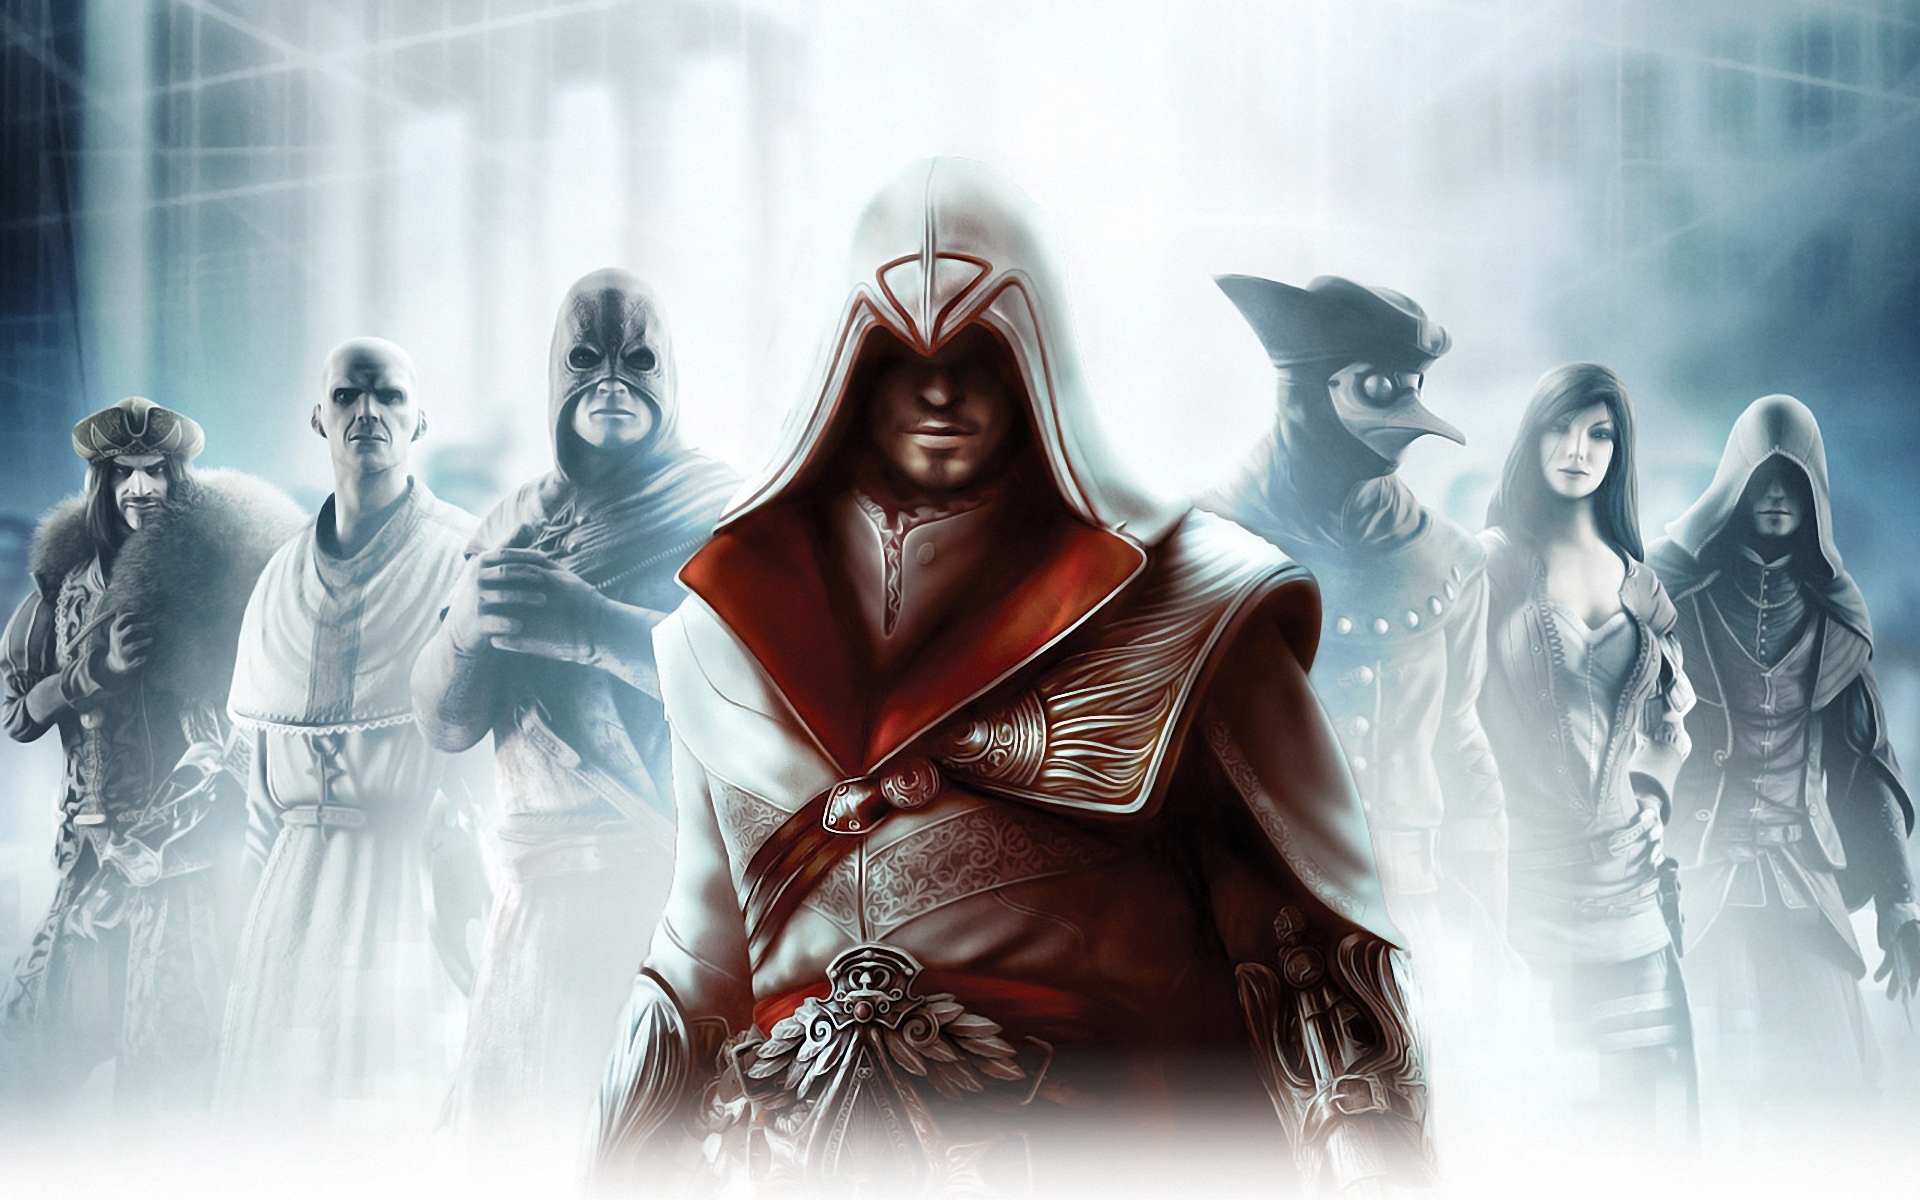 Assassin's Creed Brotherhood Wallpapers, Pictures, Images